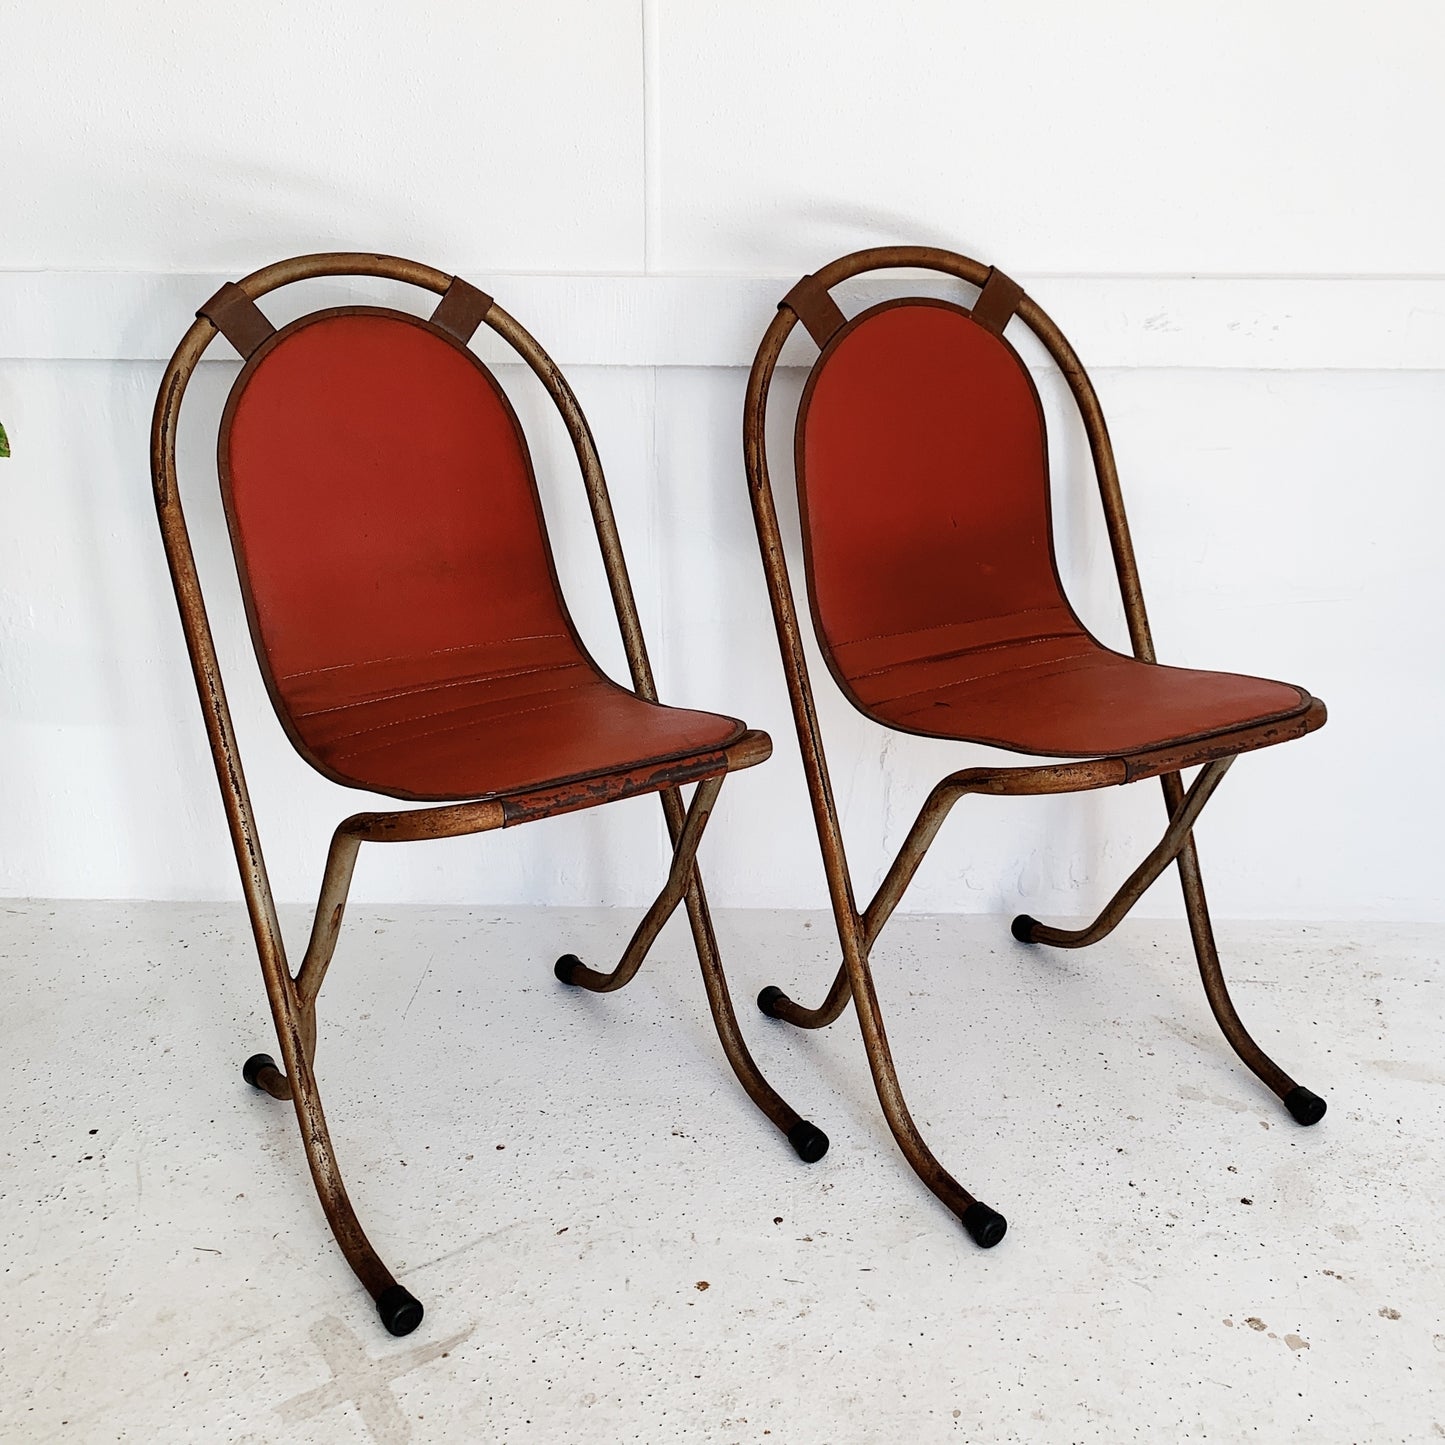 Pair of Red Delicious Sebel Stak-A-Bye Garden Chairs